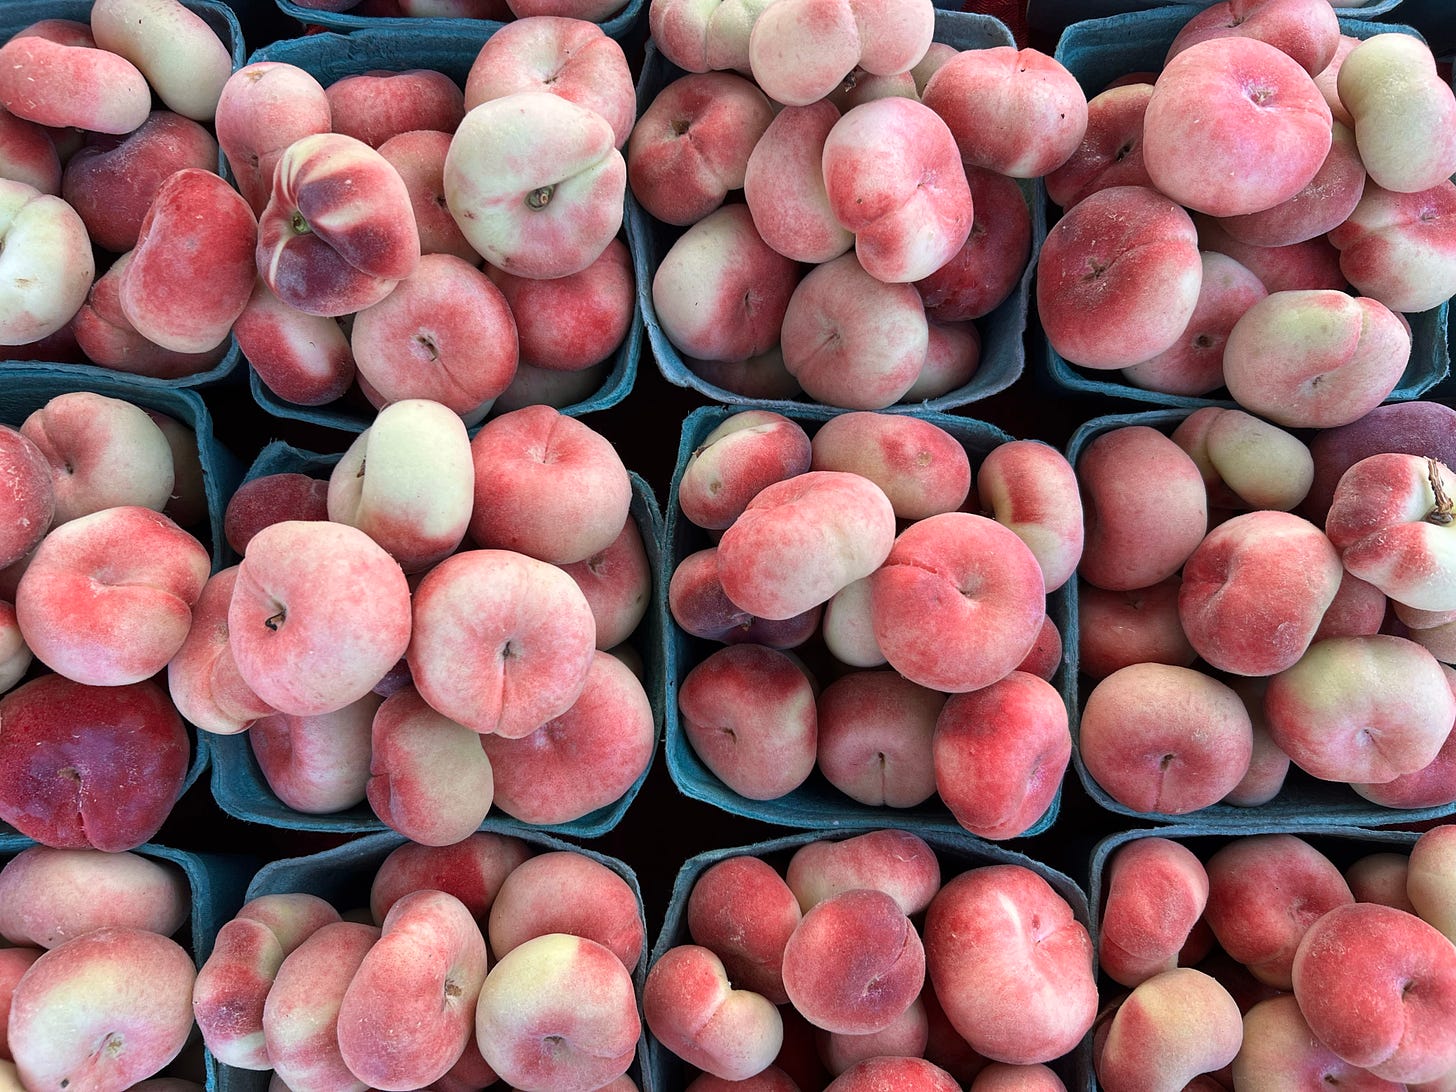 overhead view of flat donut style peaches in boxes - the peaches are pink and yellow and orange